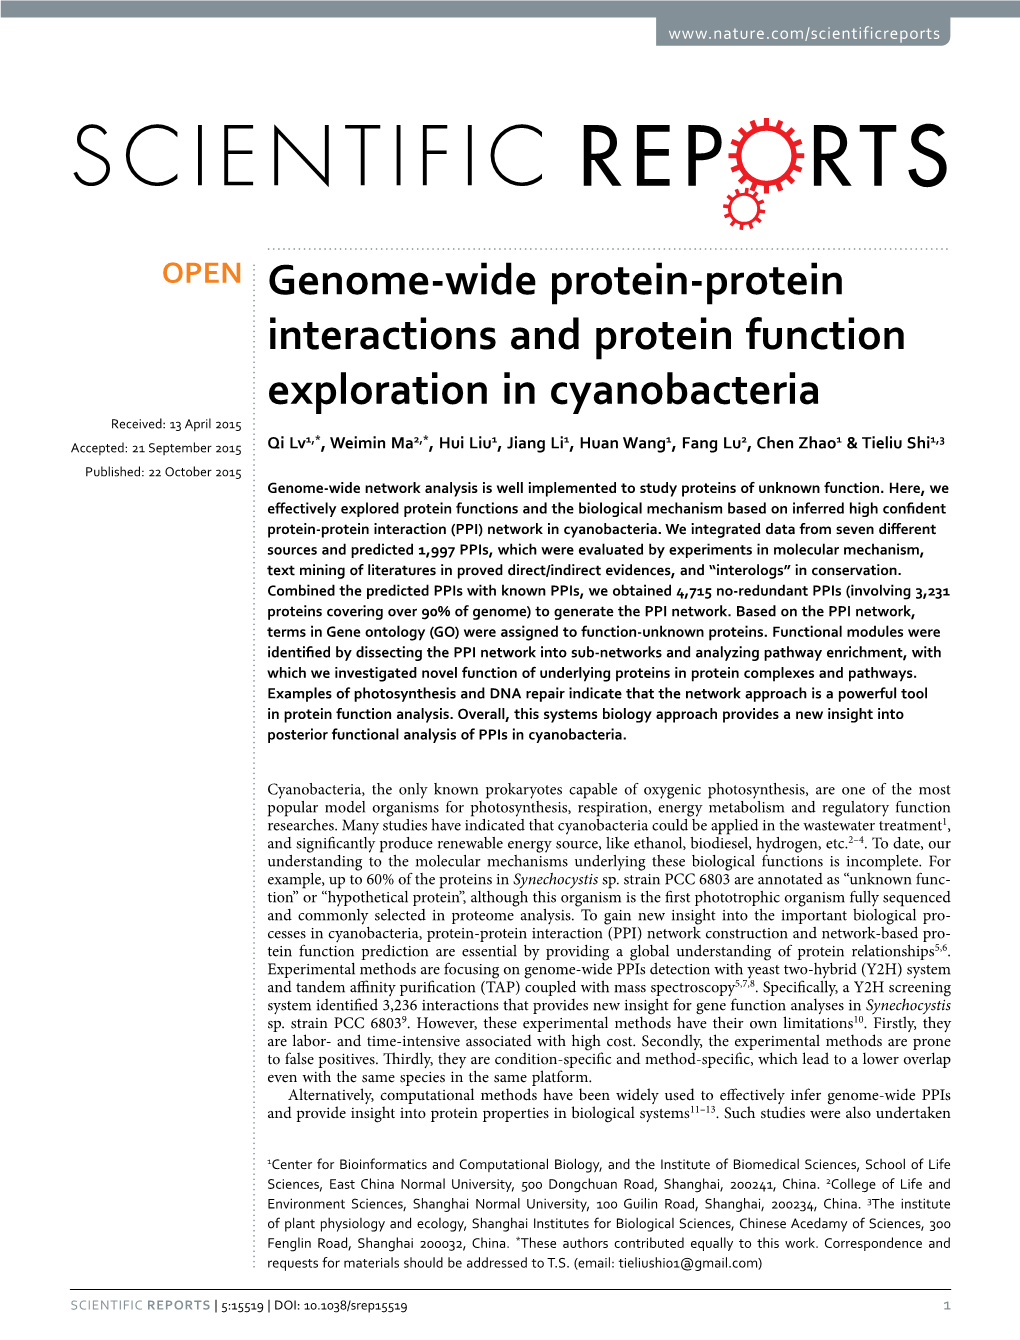 Genome-Wide Protein-Protein Interactions and Protein Function